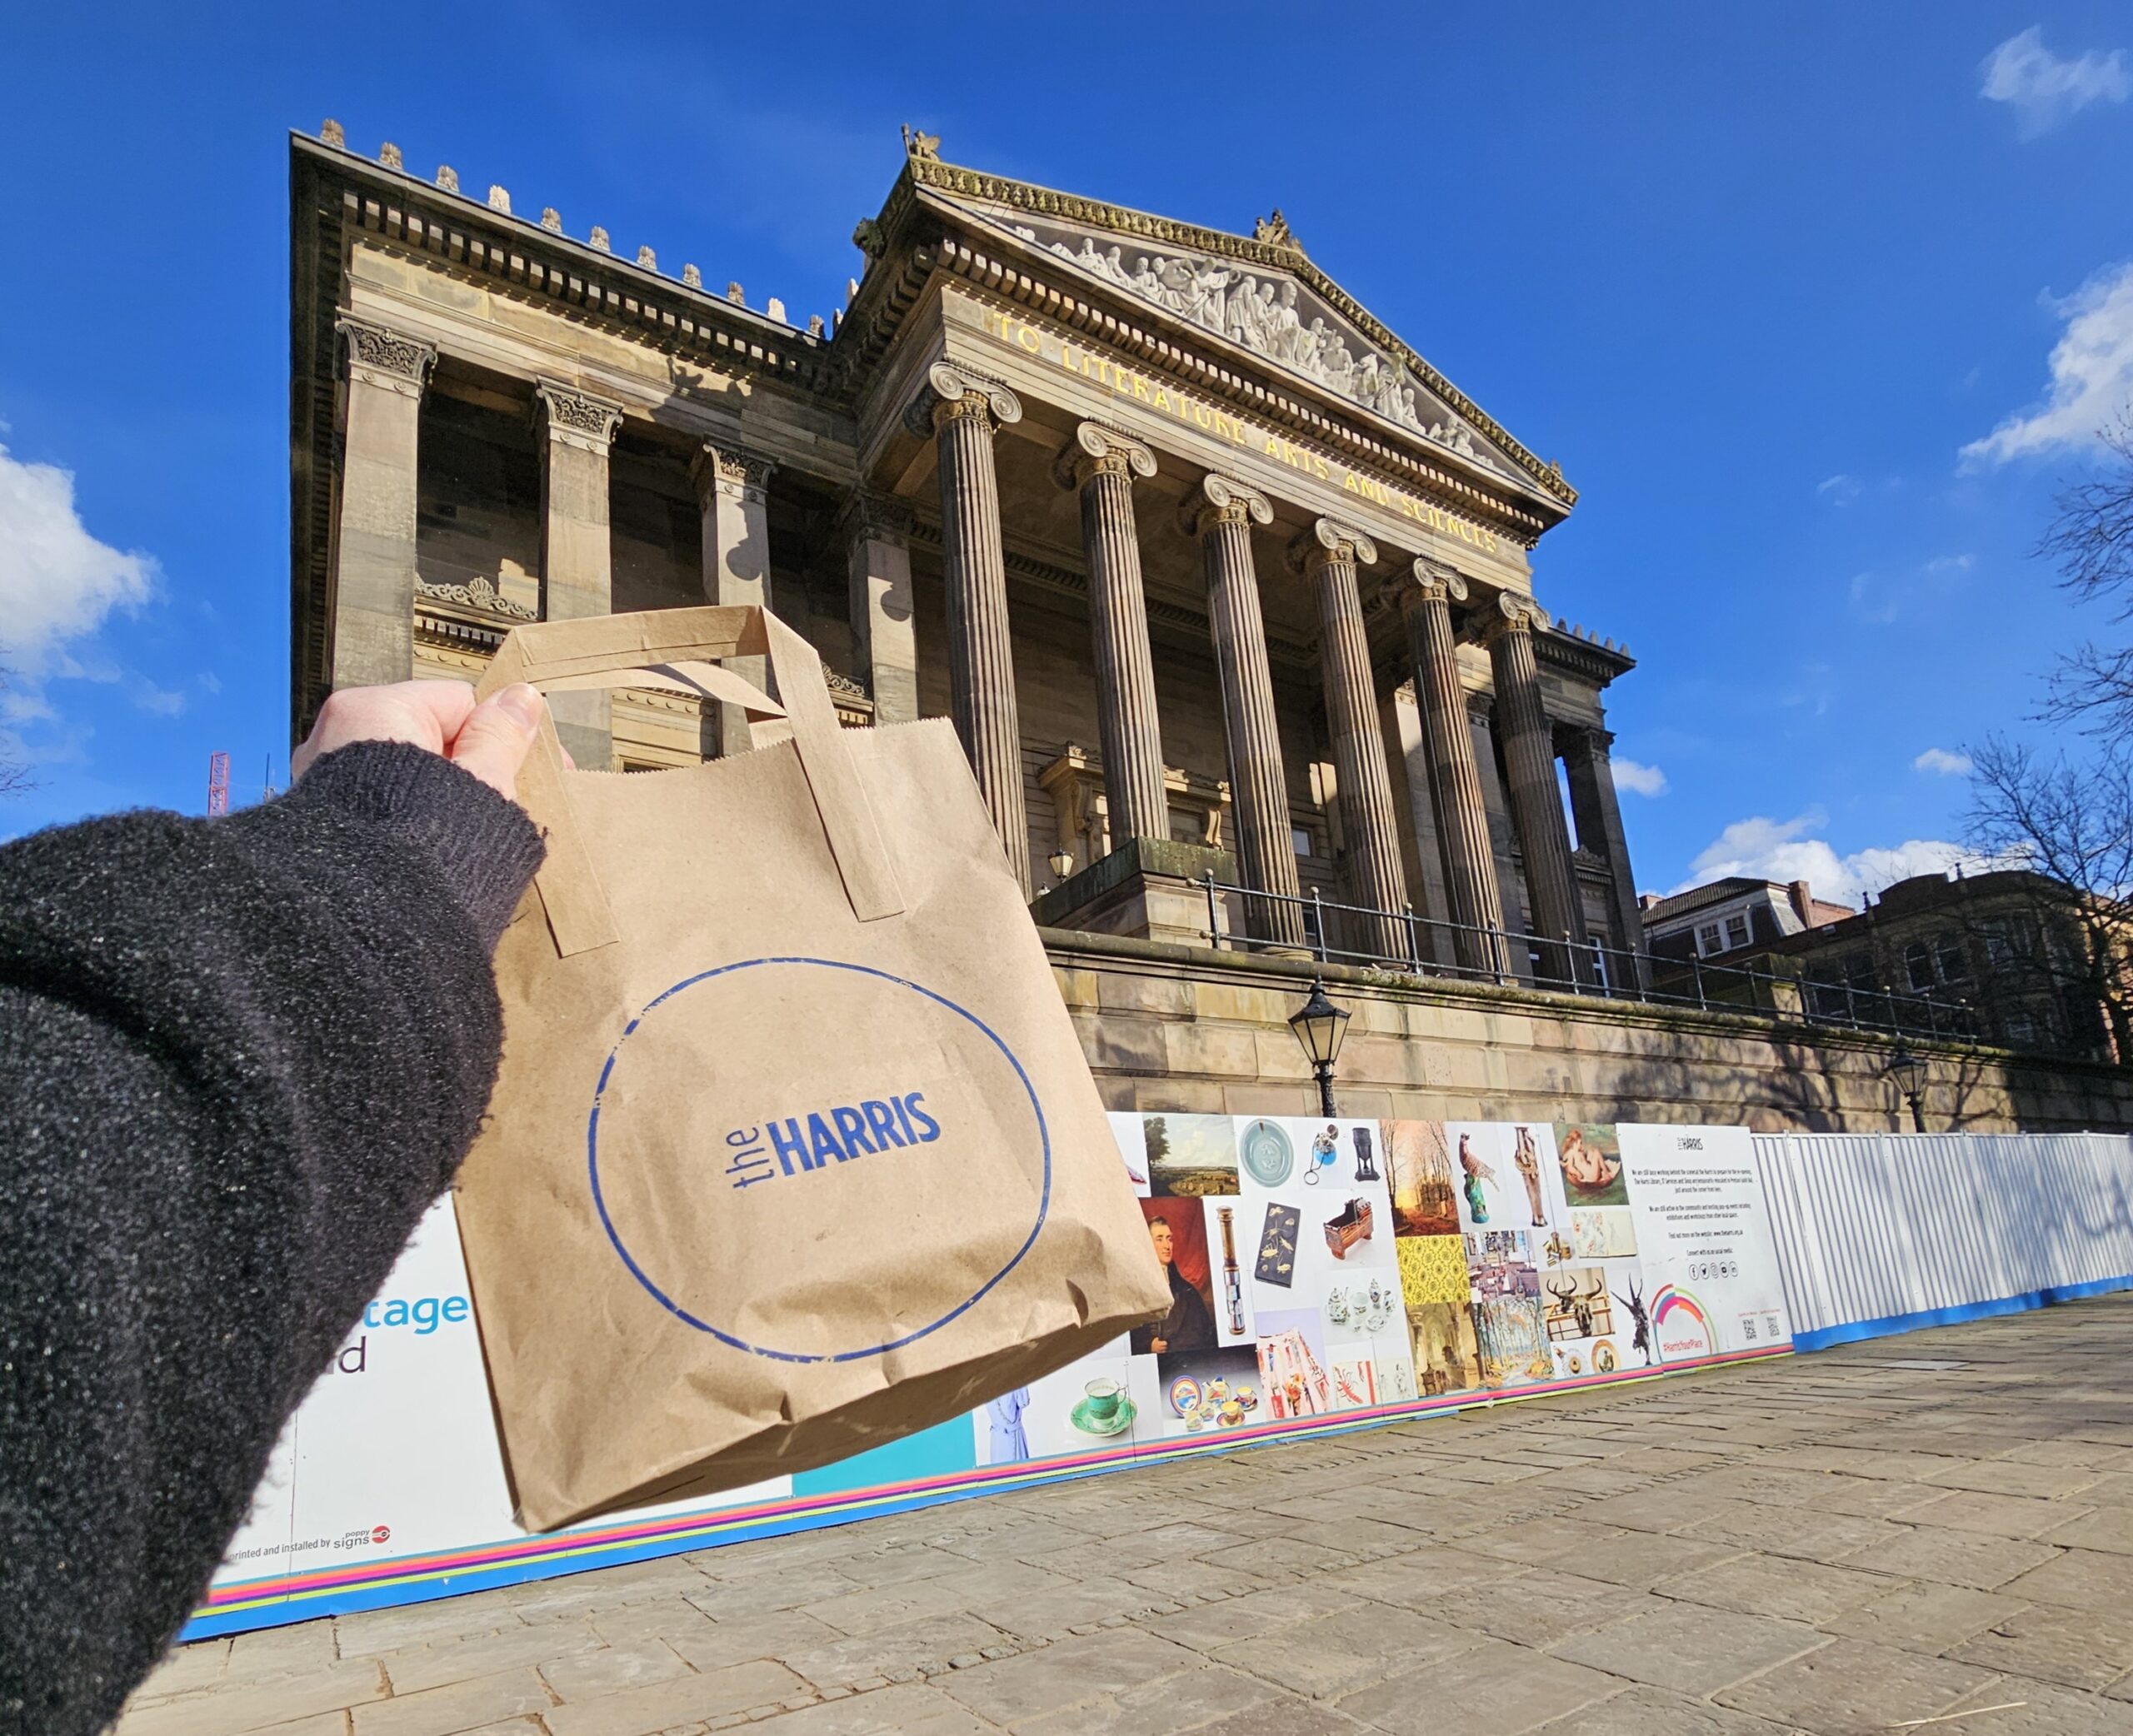 A small brown gift bag being held up in front of the Harris building.